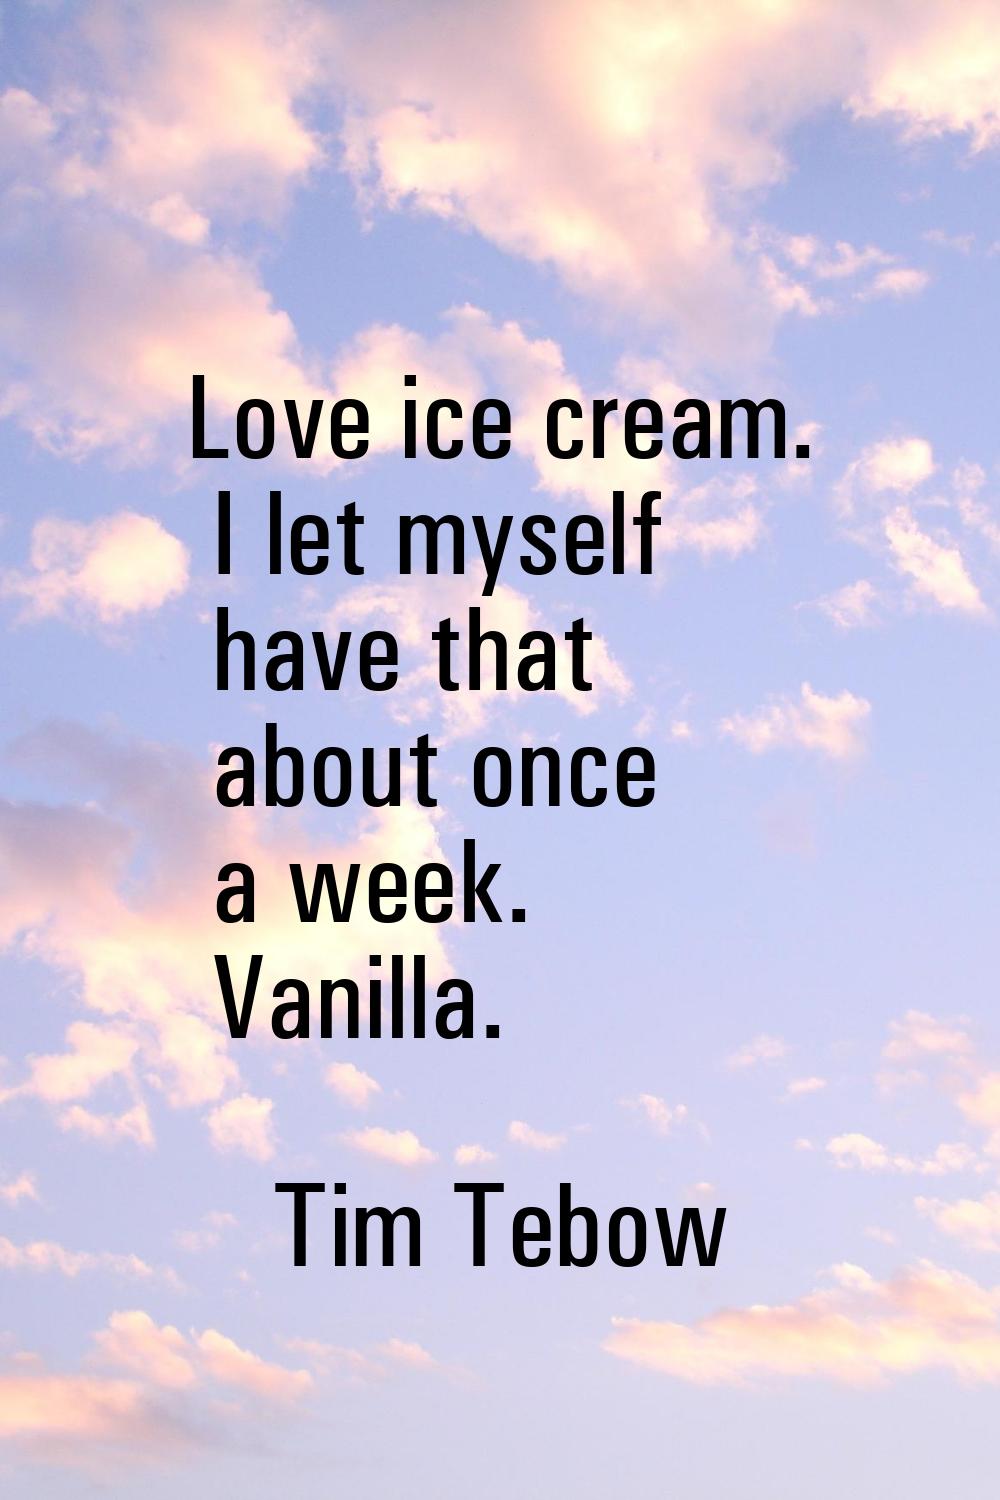 Love ice cream. I let myself have that about once a week. Vanilla.